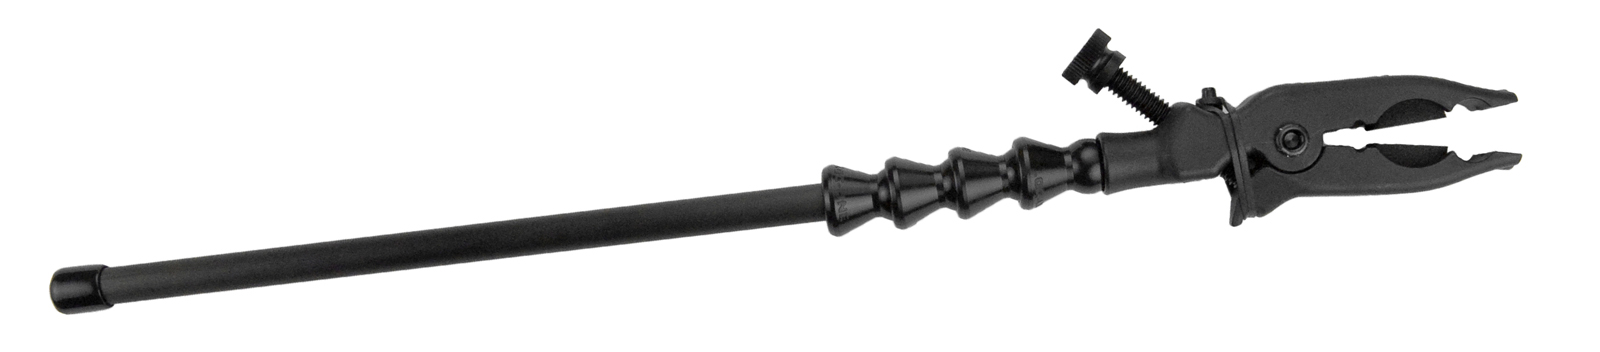 Wimberley Plamp Extension Rod PP-210 showing carbon fiber rod and articulating segments with Plamp Clip